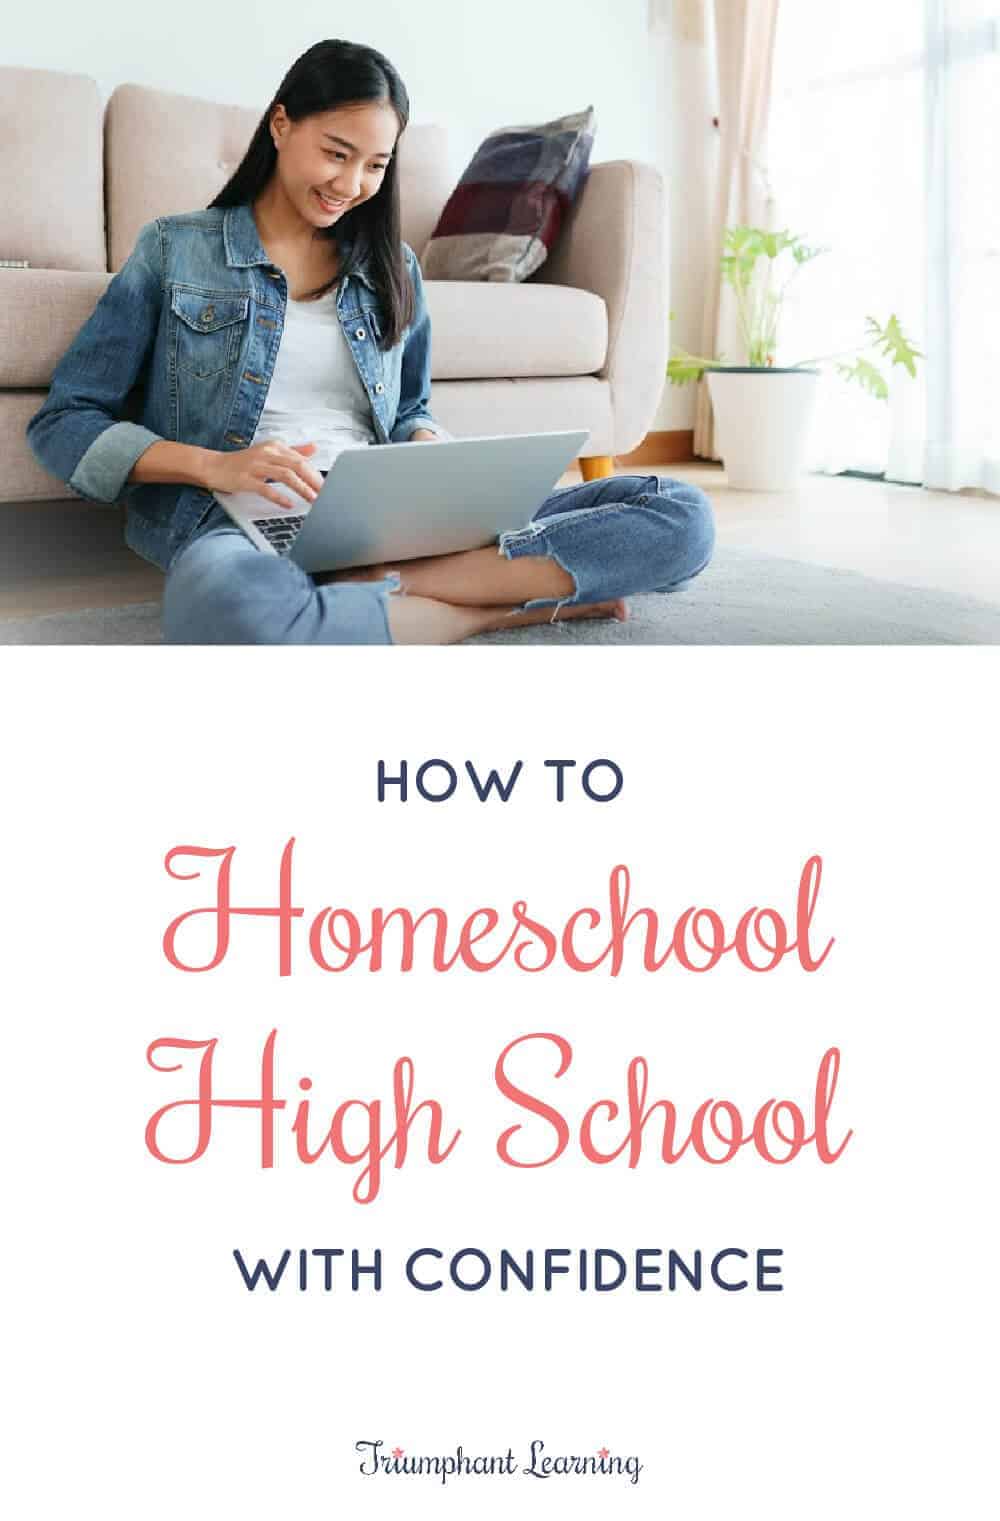 Nervous about homeschooling high school? These two principles will help you relax, enjoy this new stage, and homeschool high school with confidence. via @TriLearning